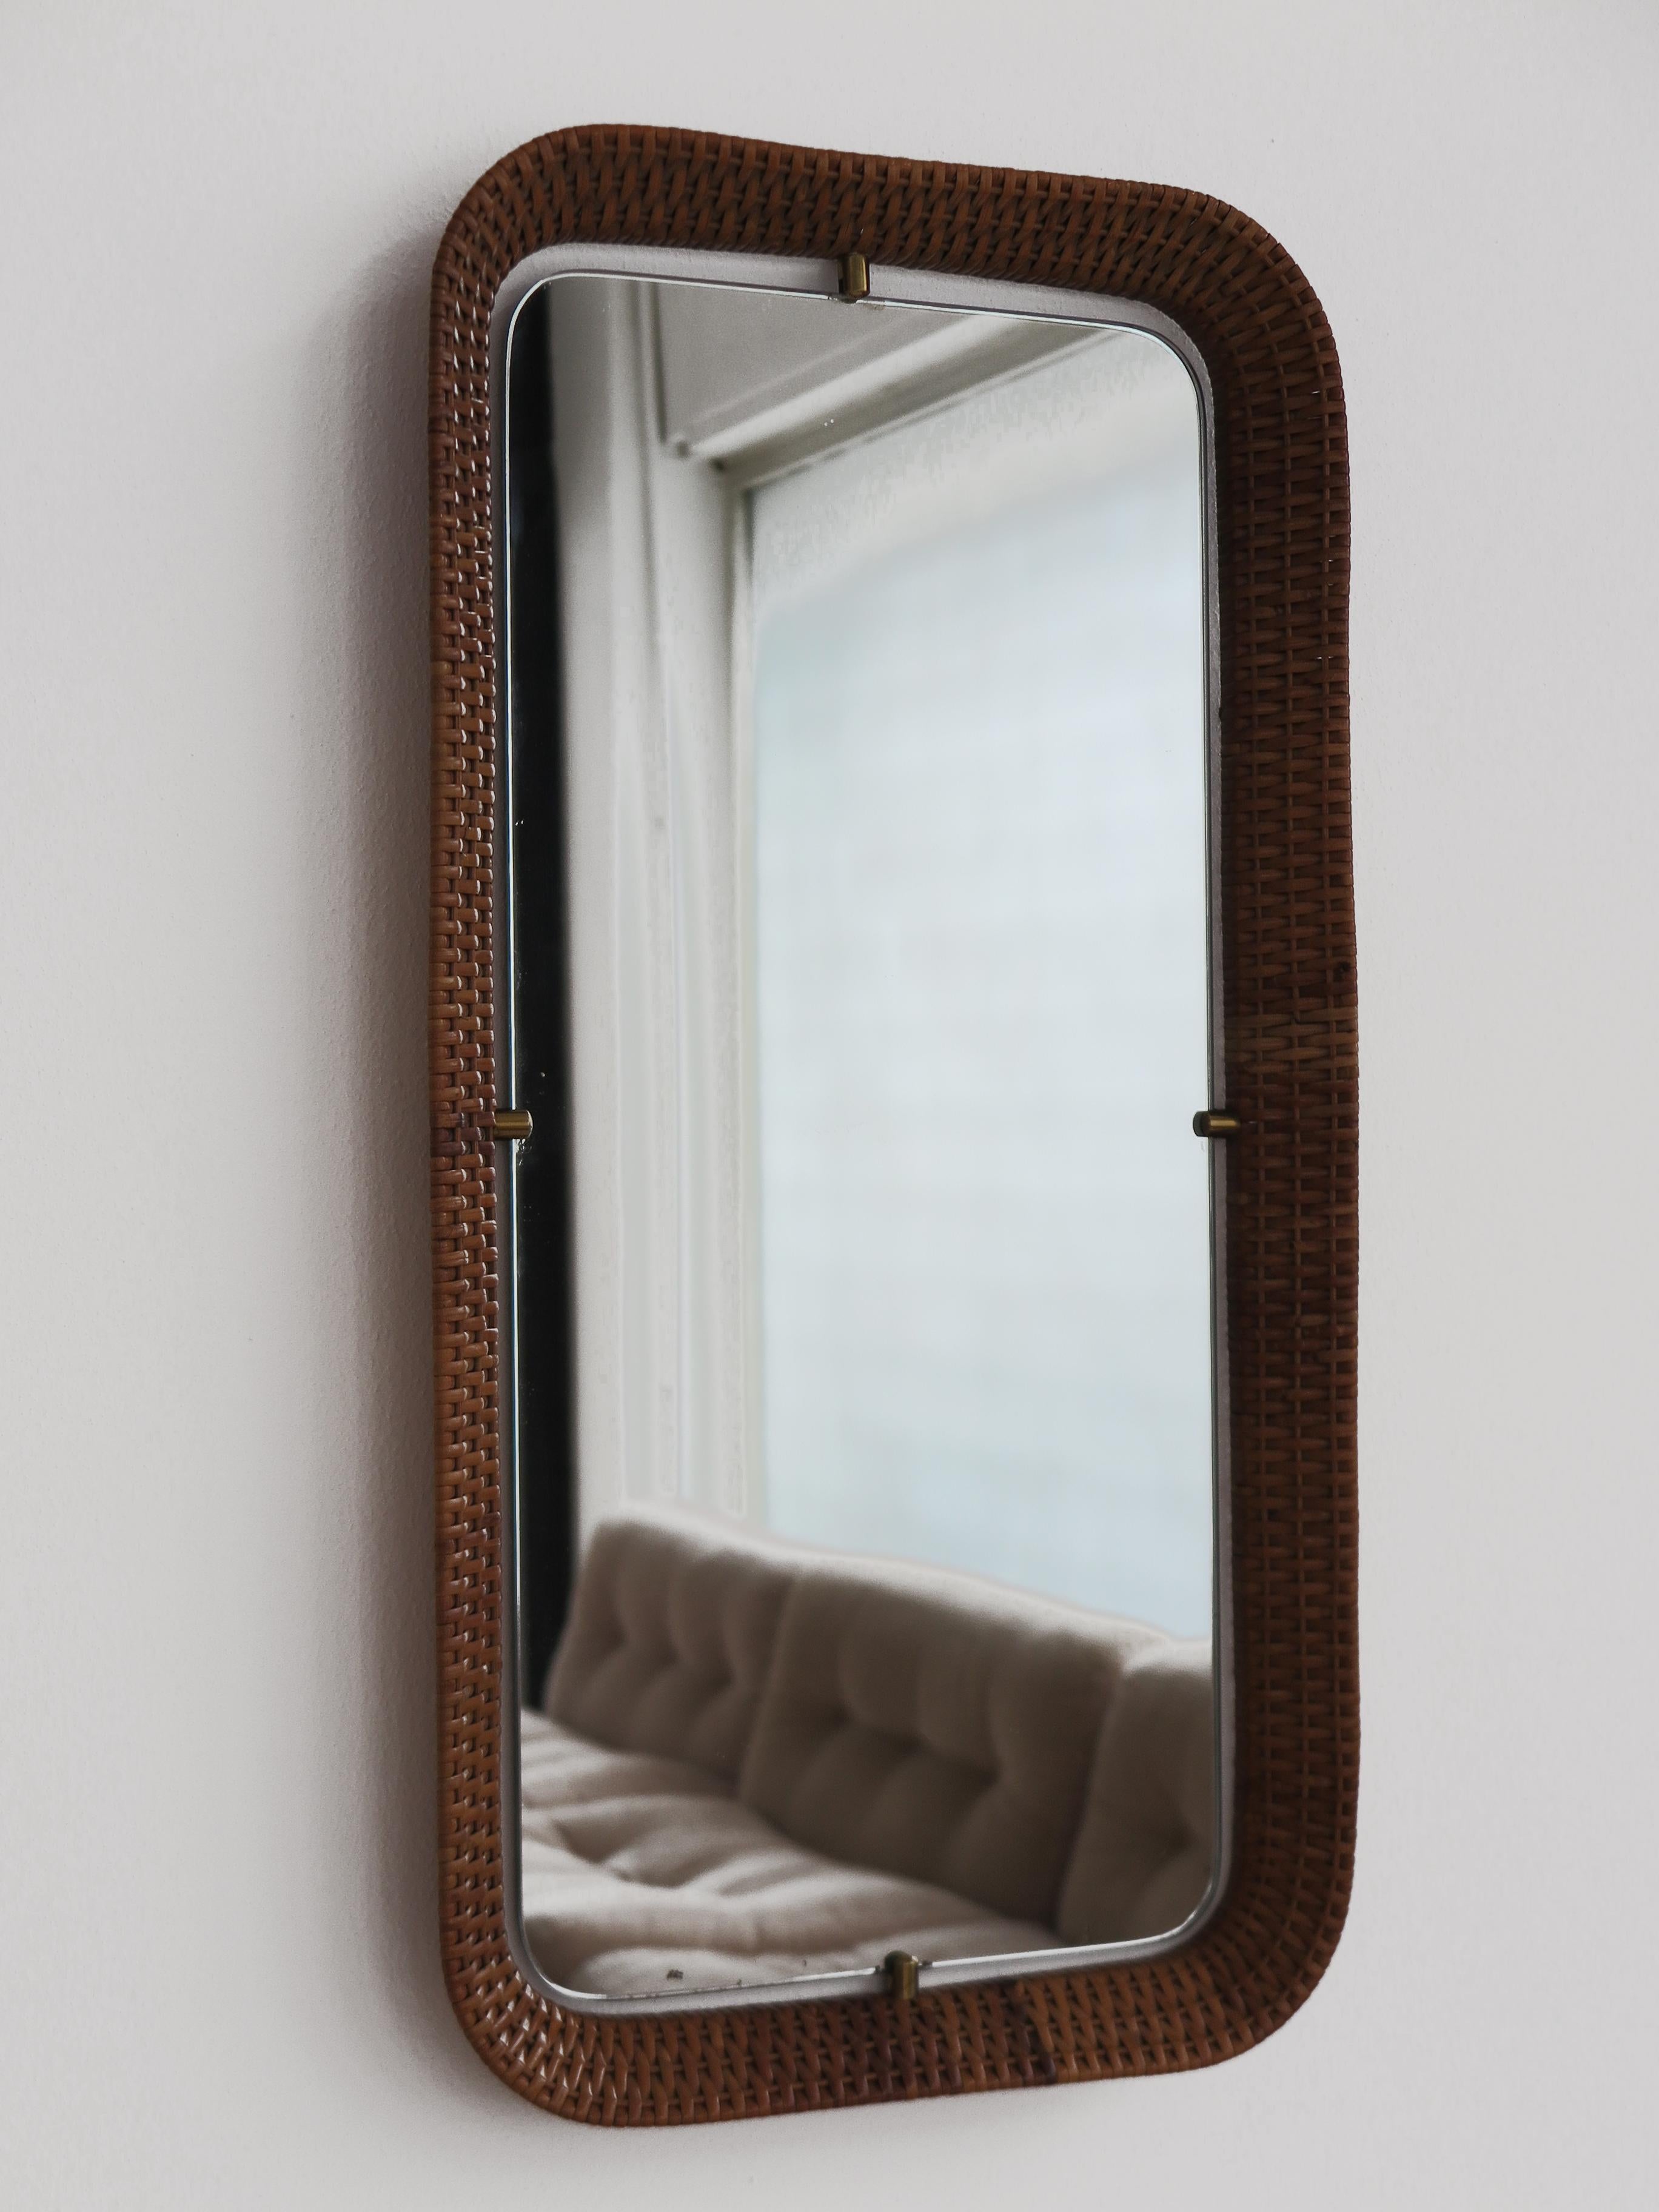 Italian midcentury modern design wall mirror with woven bamboo frame and brass details, 1960s Italy 

Please note that the wall mnirror is original of the period and this shows normal signs of age and use.